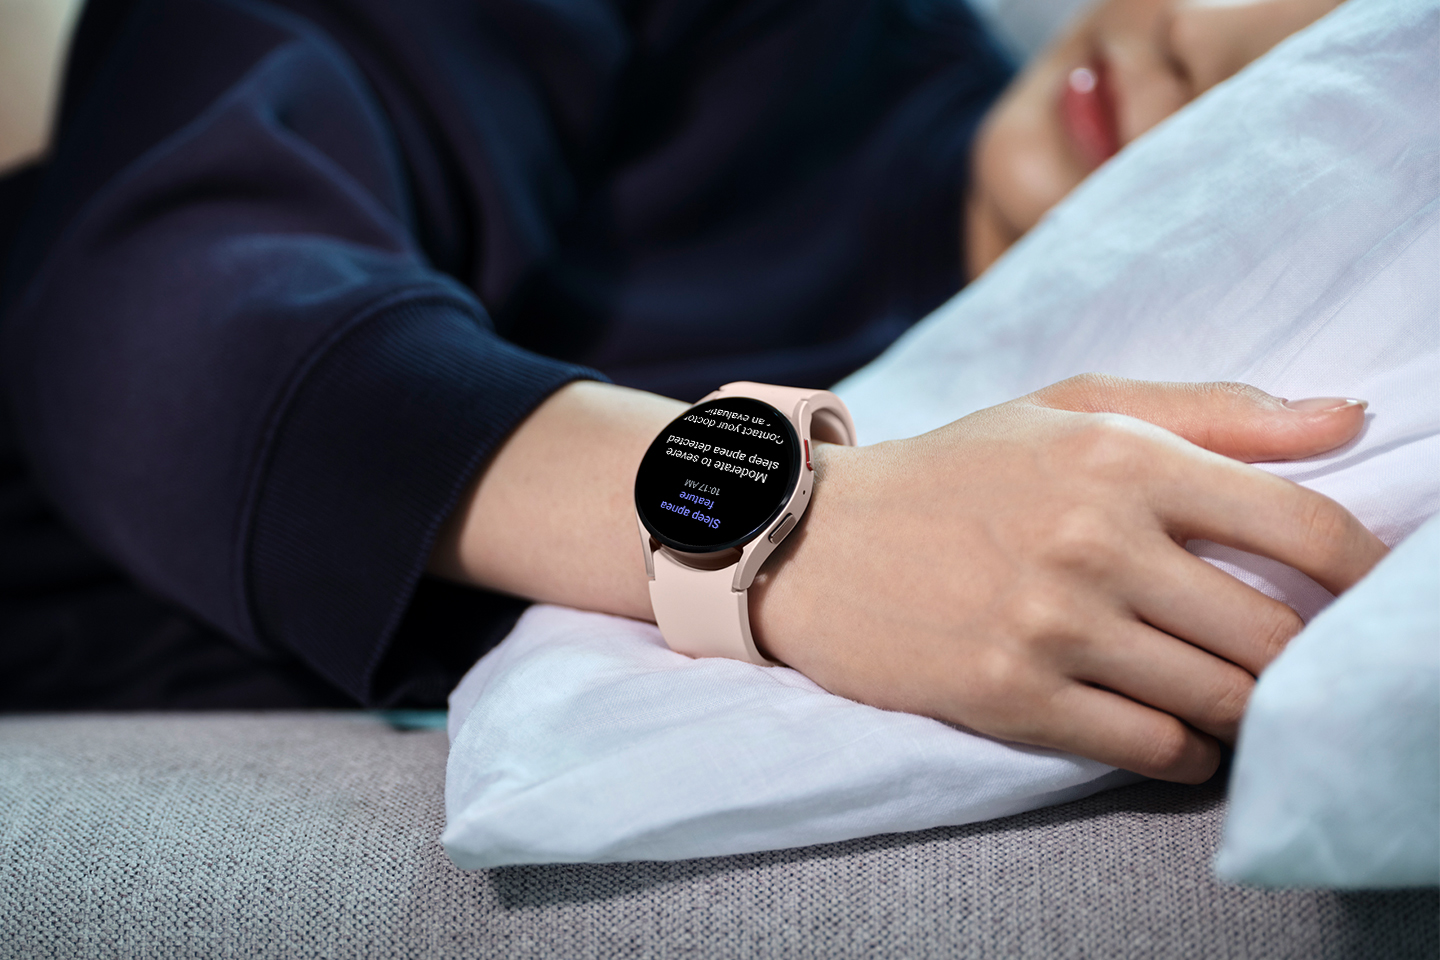 Lifestyle image showing the new Sleep apnea feature on Galaxy Watch